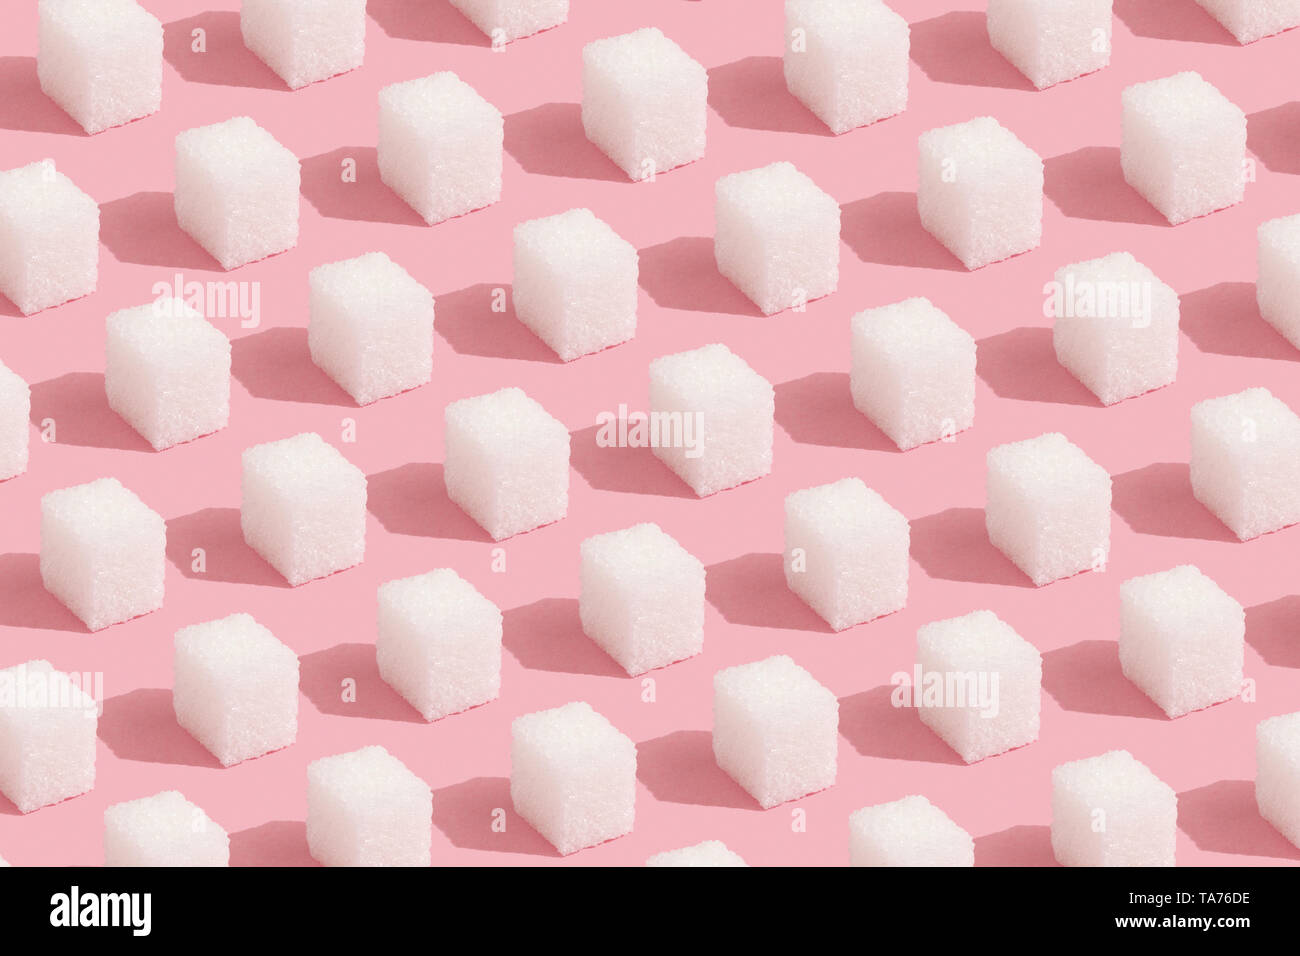 Geometry Pattern made of white sugar cubes on pastel pink trendy background. Abstract, minimal style. Stock Photo